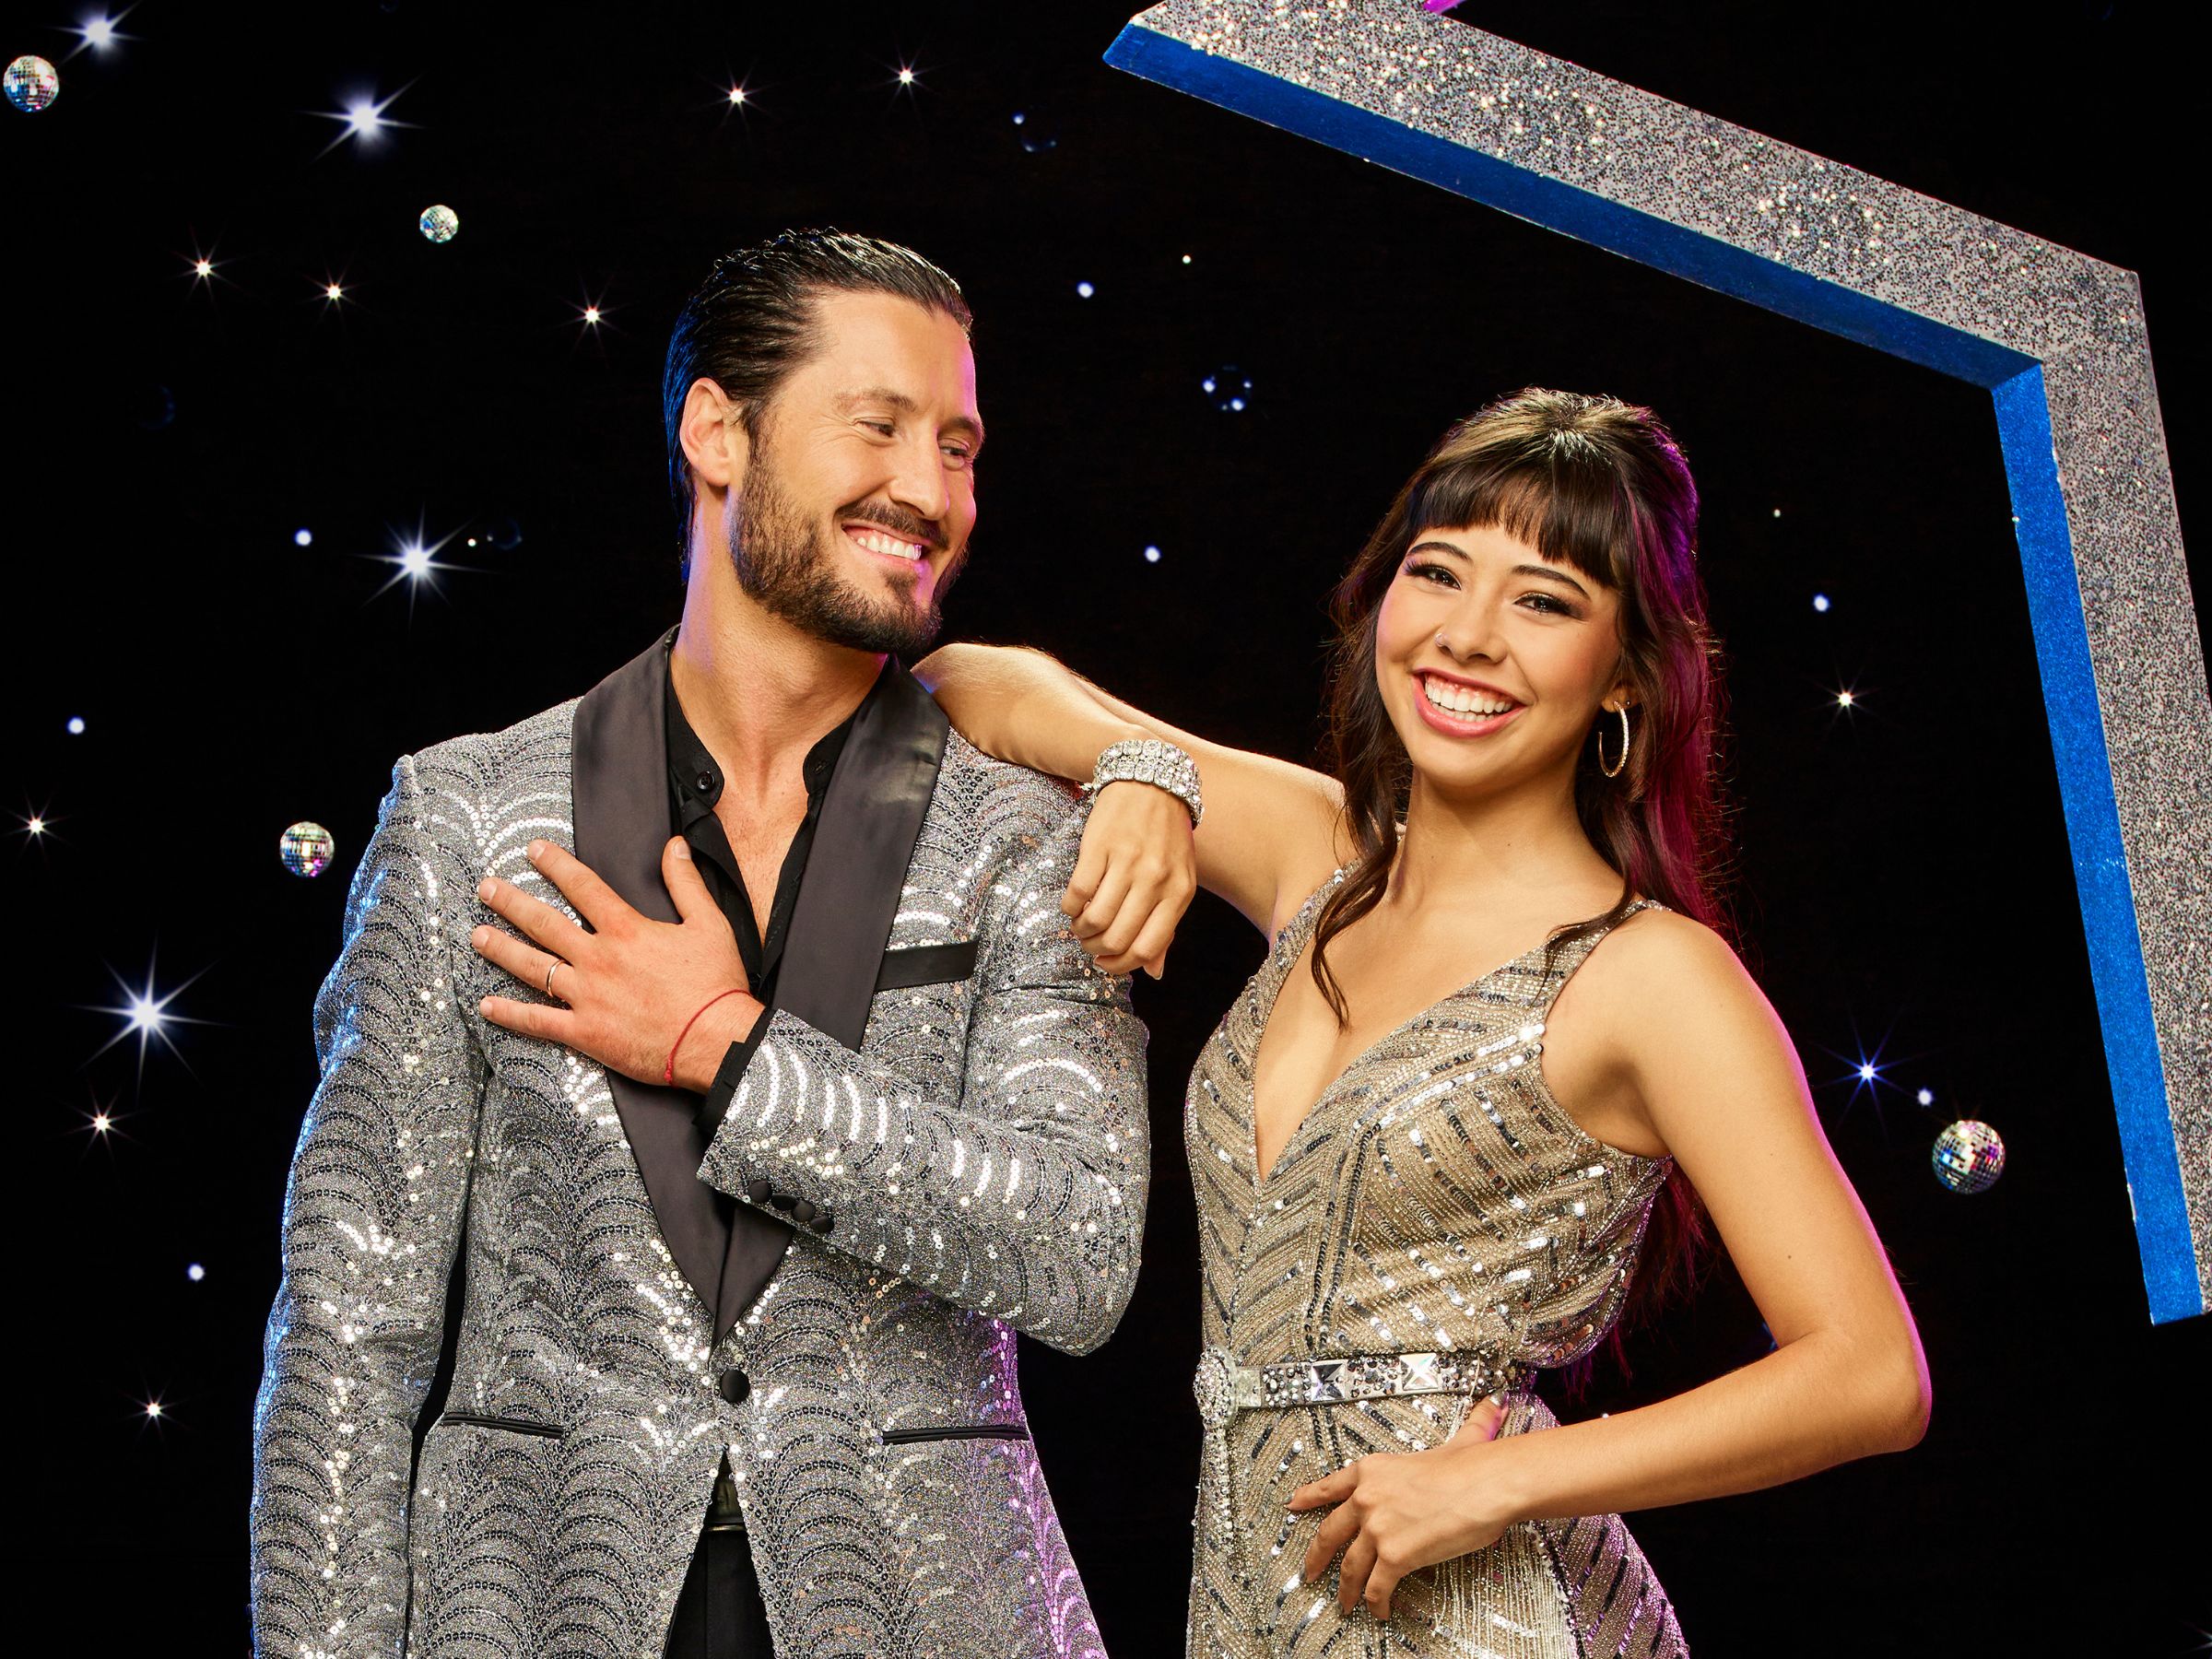 DANCING WITH THE STARS – ABC’s “Dancing With The Stars” stars Val Chmerkovsky and Xochitl Gomez. (ABC/Andrew Eccles)